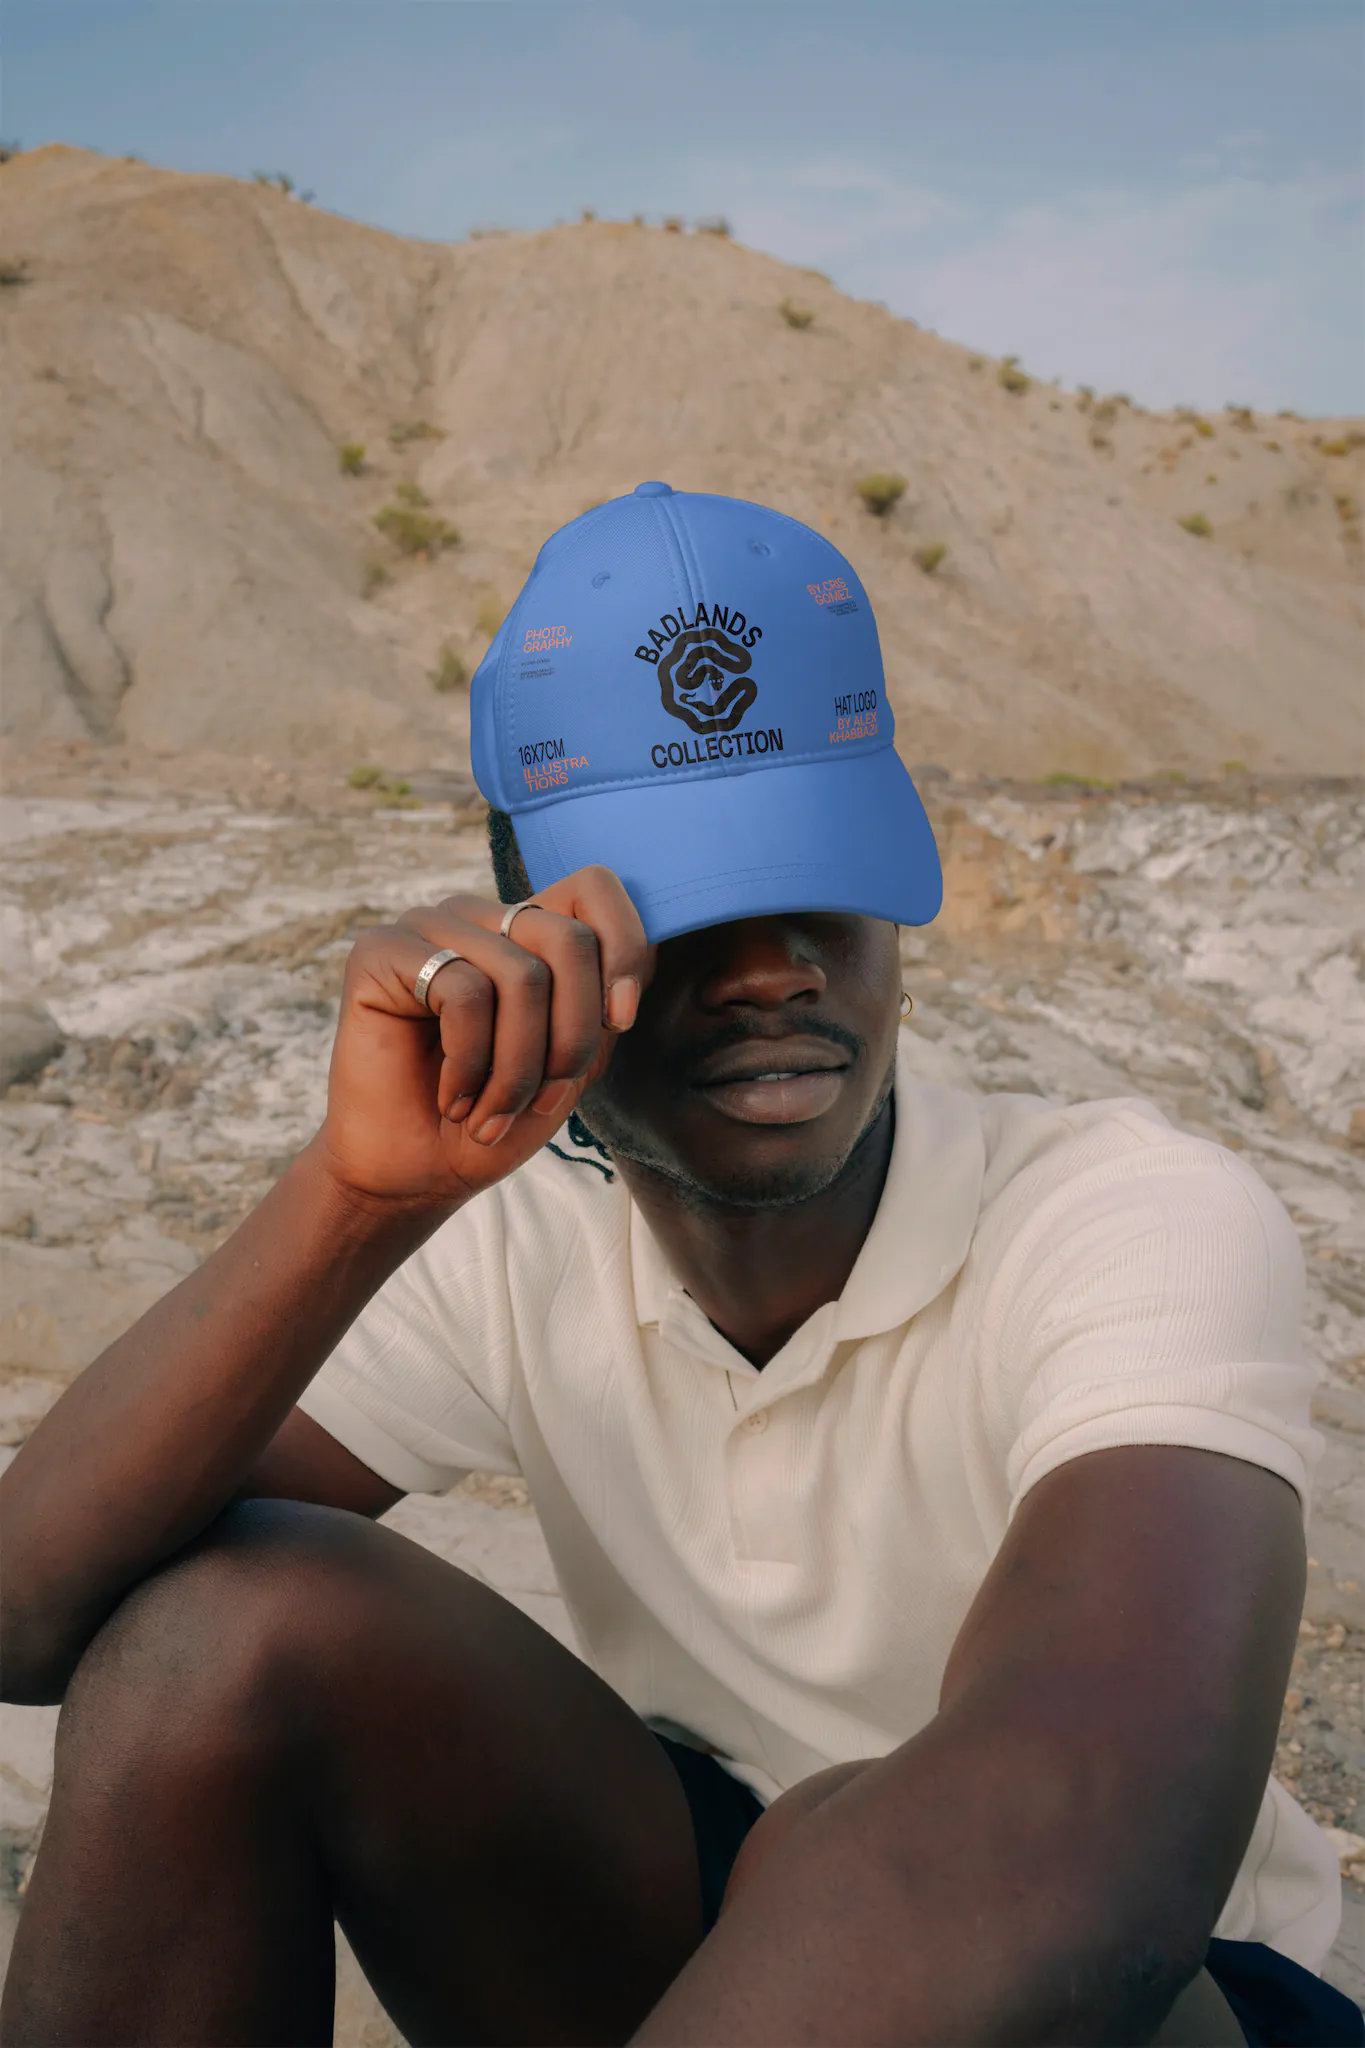 Black guy wearing a hat mock-up in a desert environment